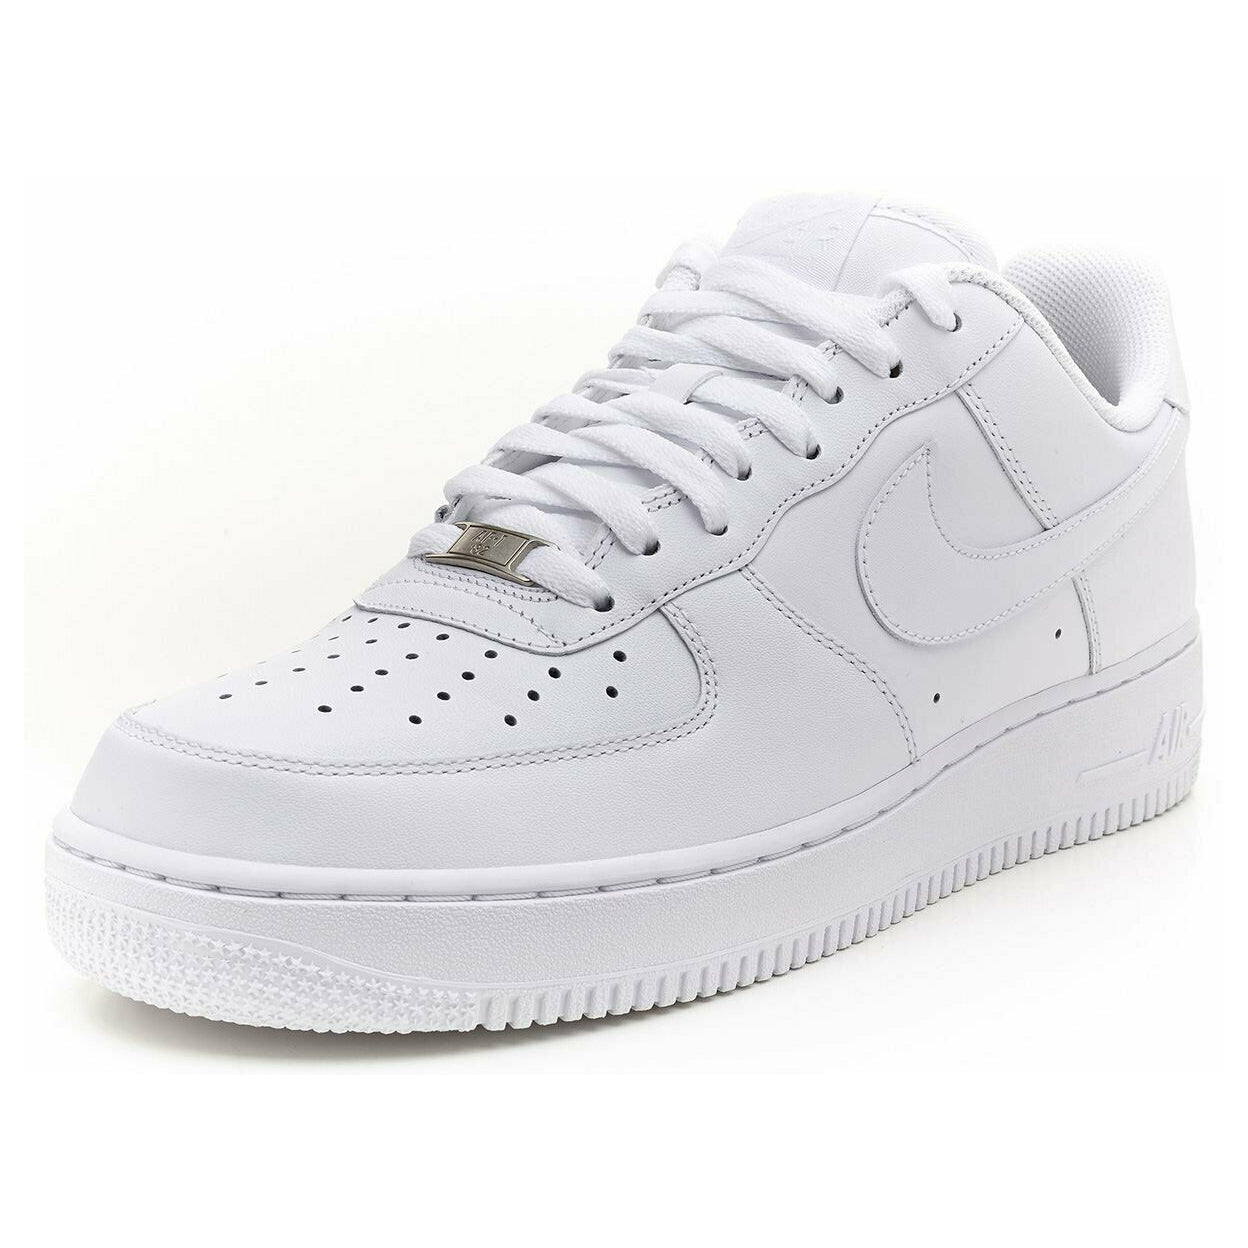 white air force 1 size 13 mens